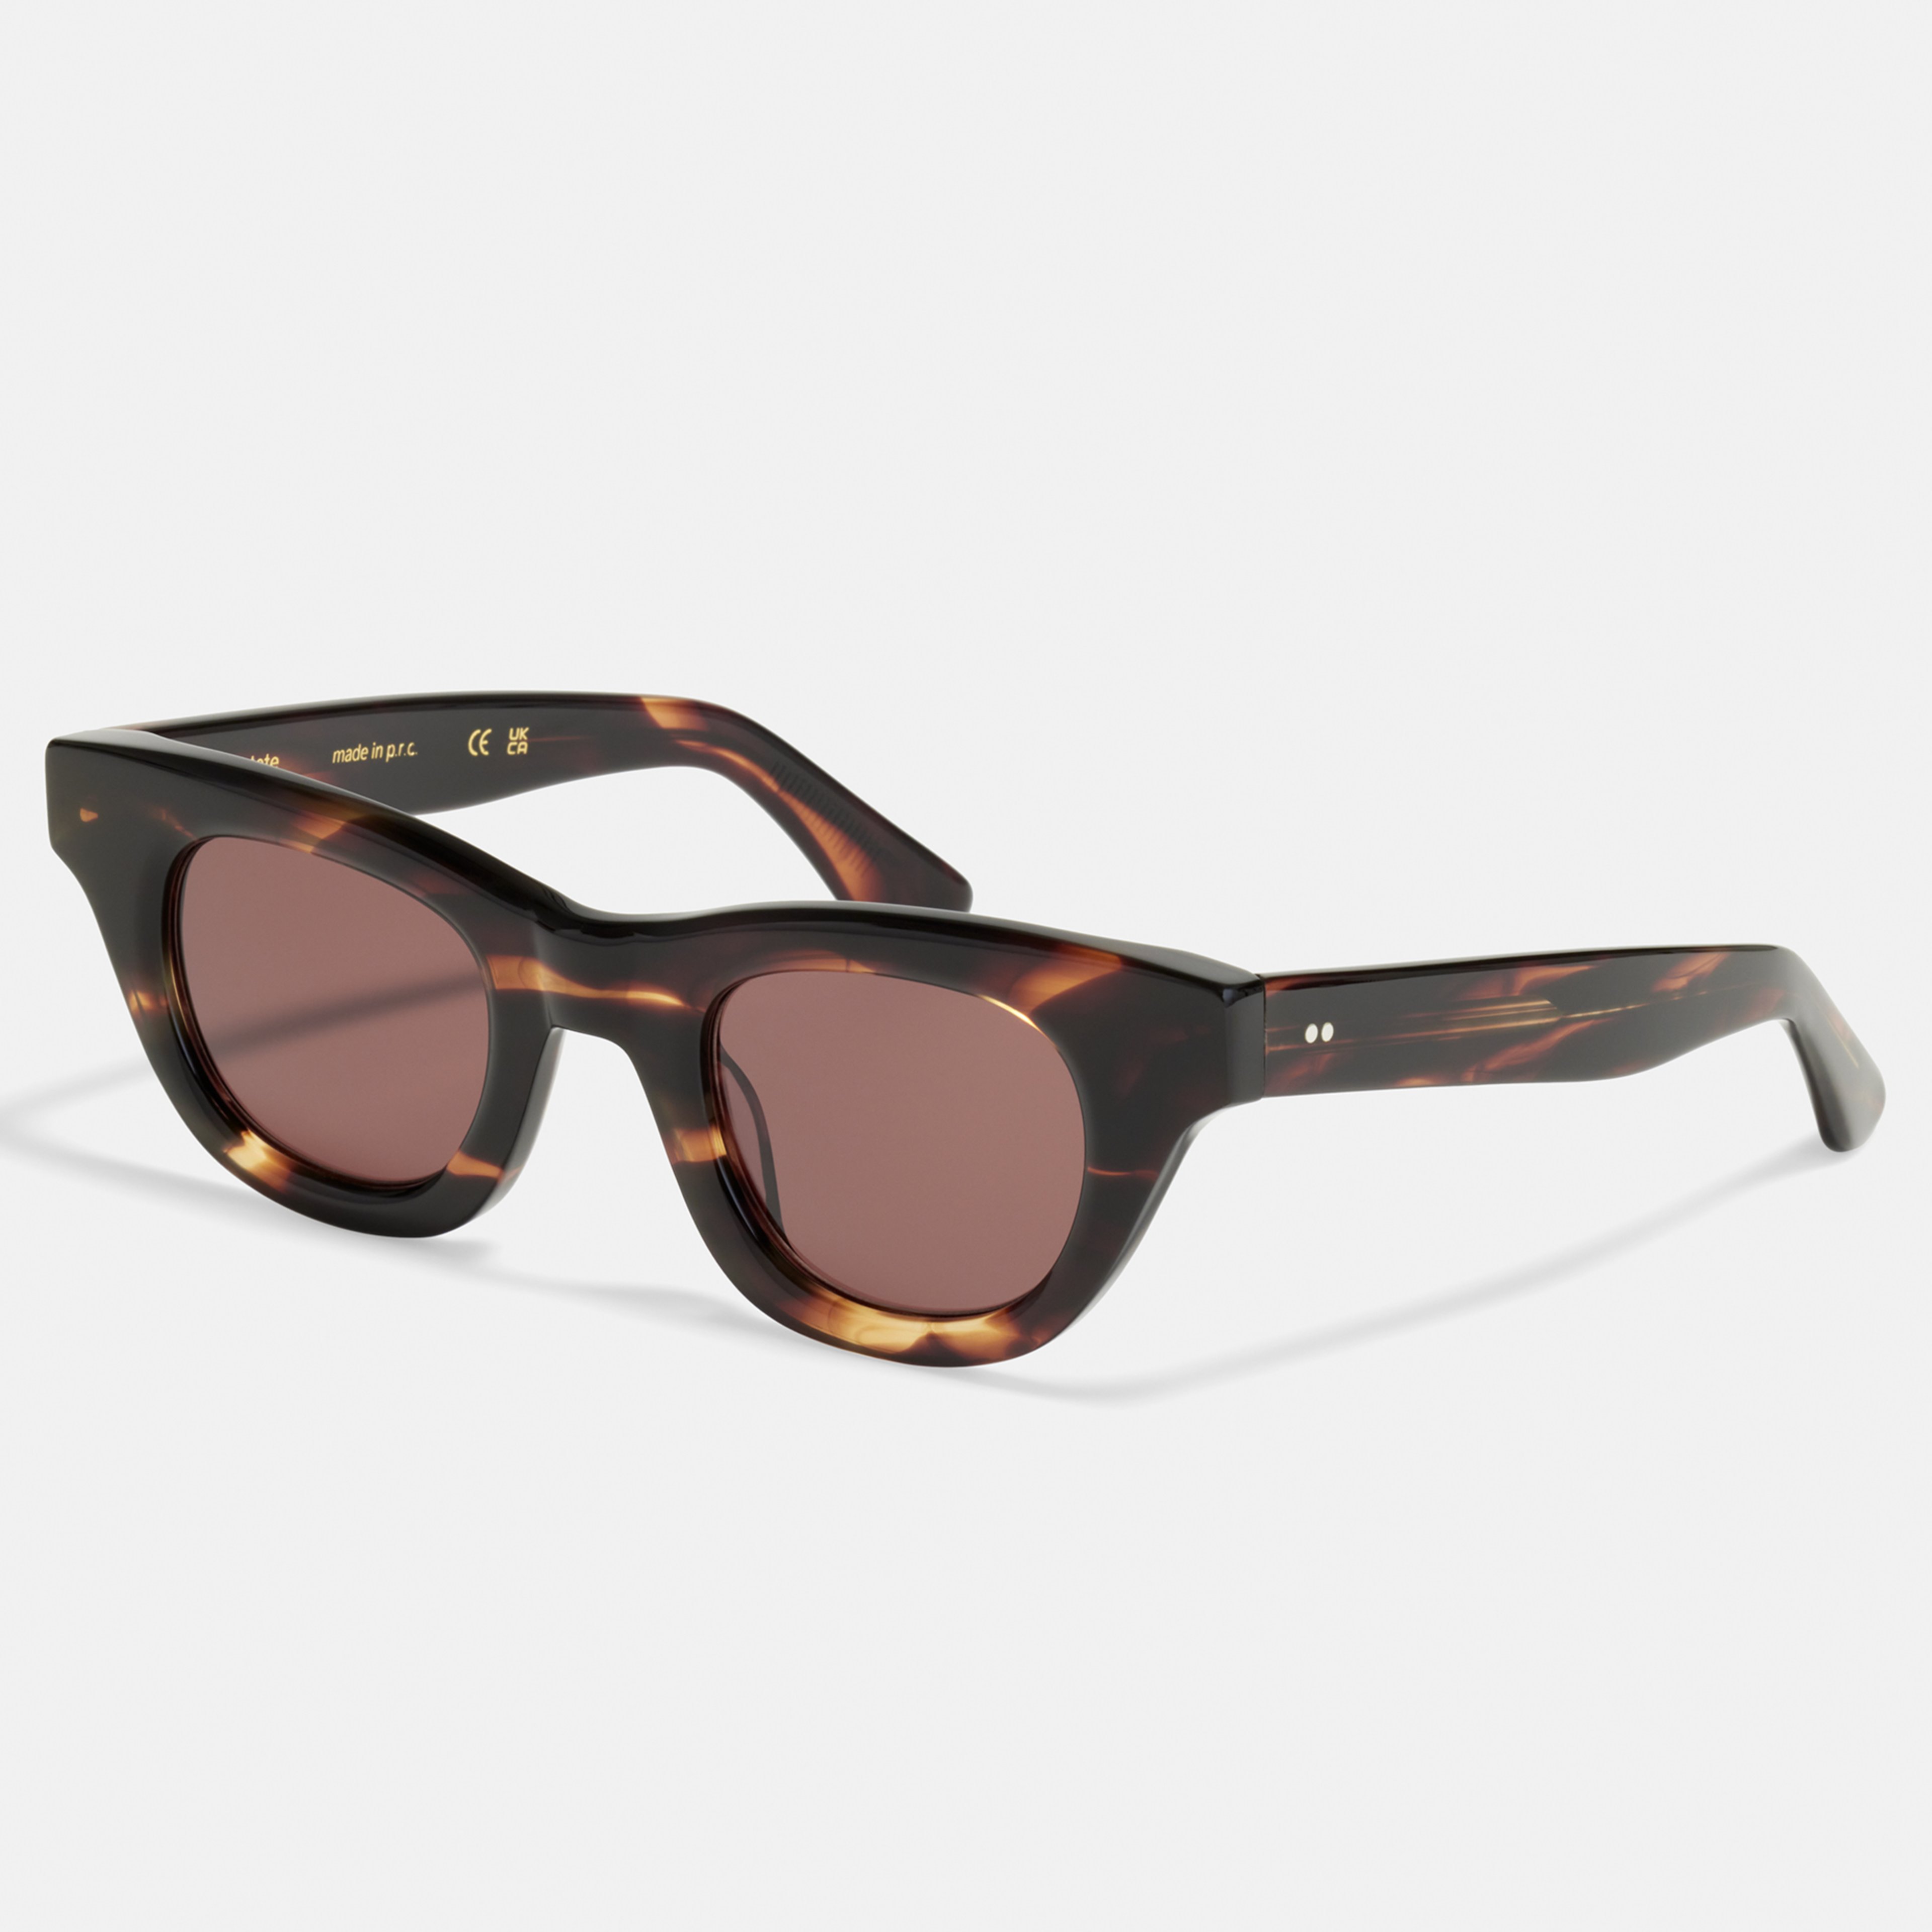 Ace & Tate Solaires | ronde Renew bio-acétate in brown,, Orange